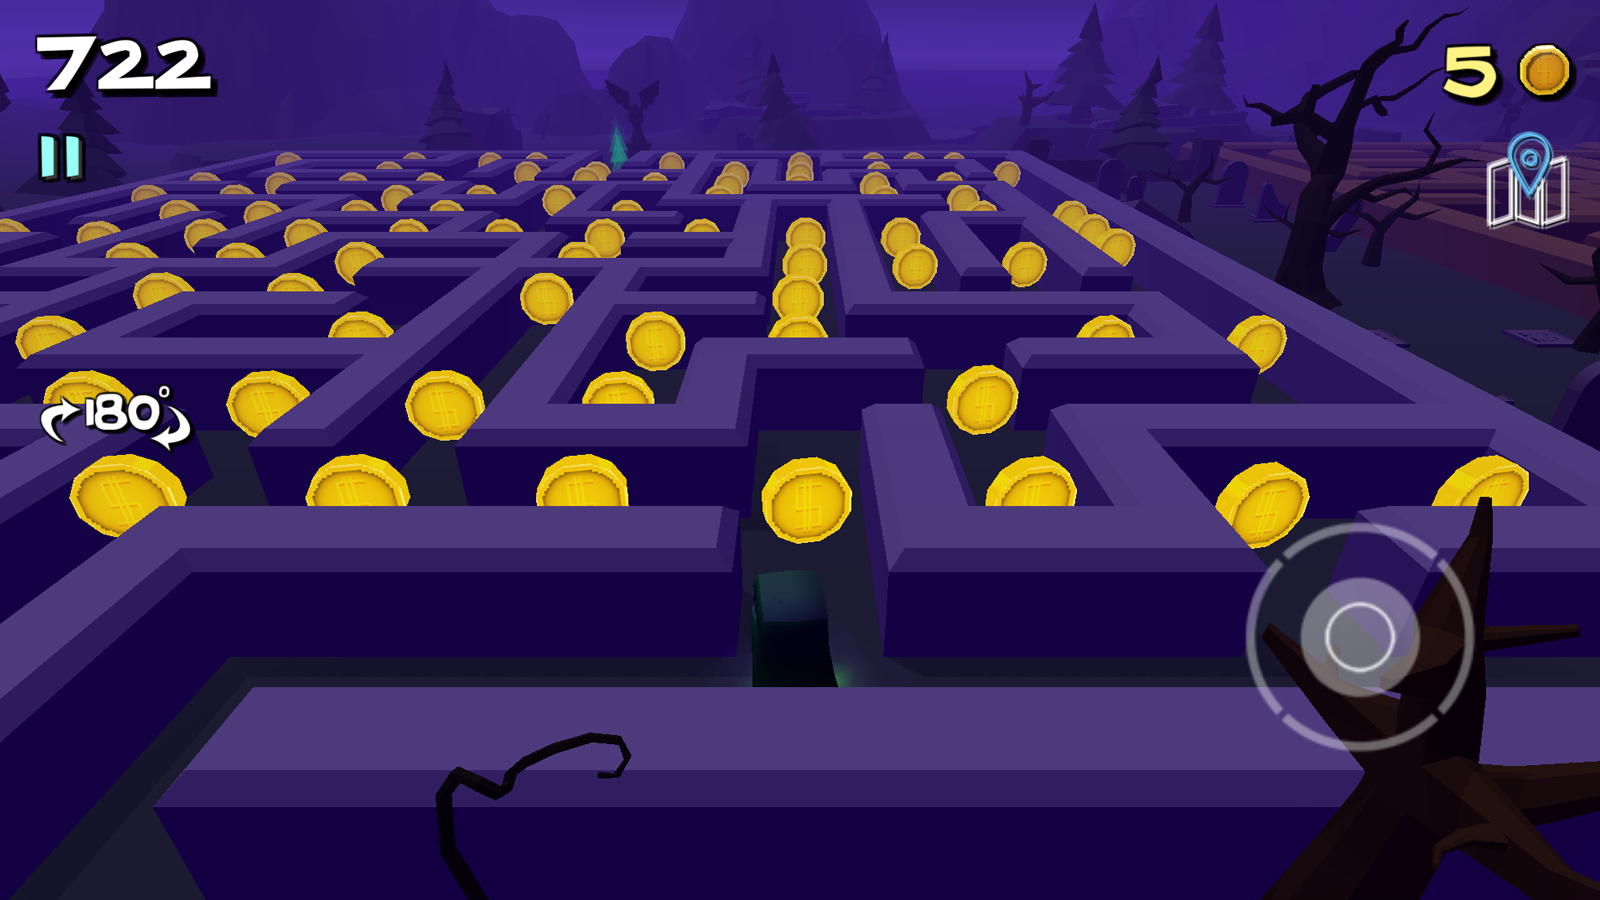 Android application 3D Maze 3 - Labyrinth Game screenshort